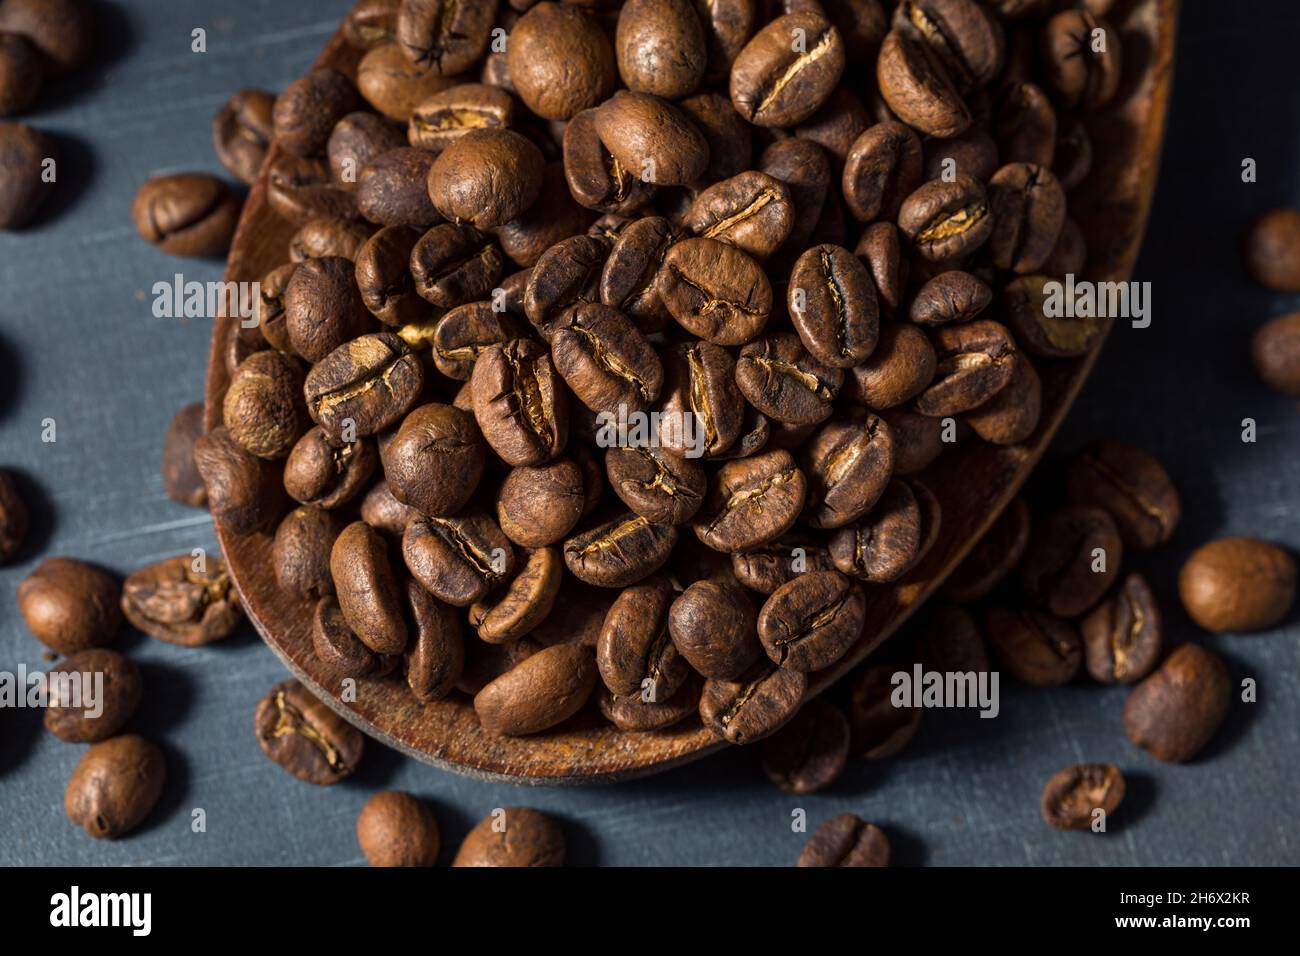 Raw Organic Roasted Espresso Coffee Beans in a Bowl Stock Photo